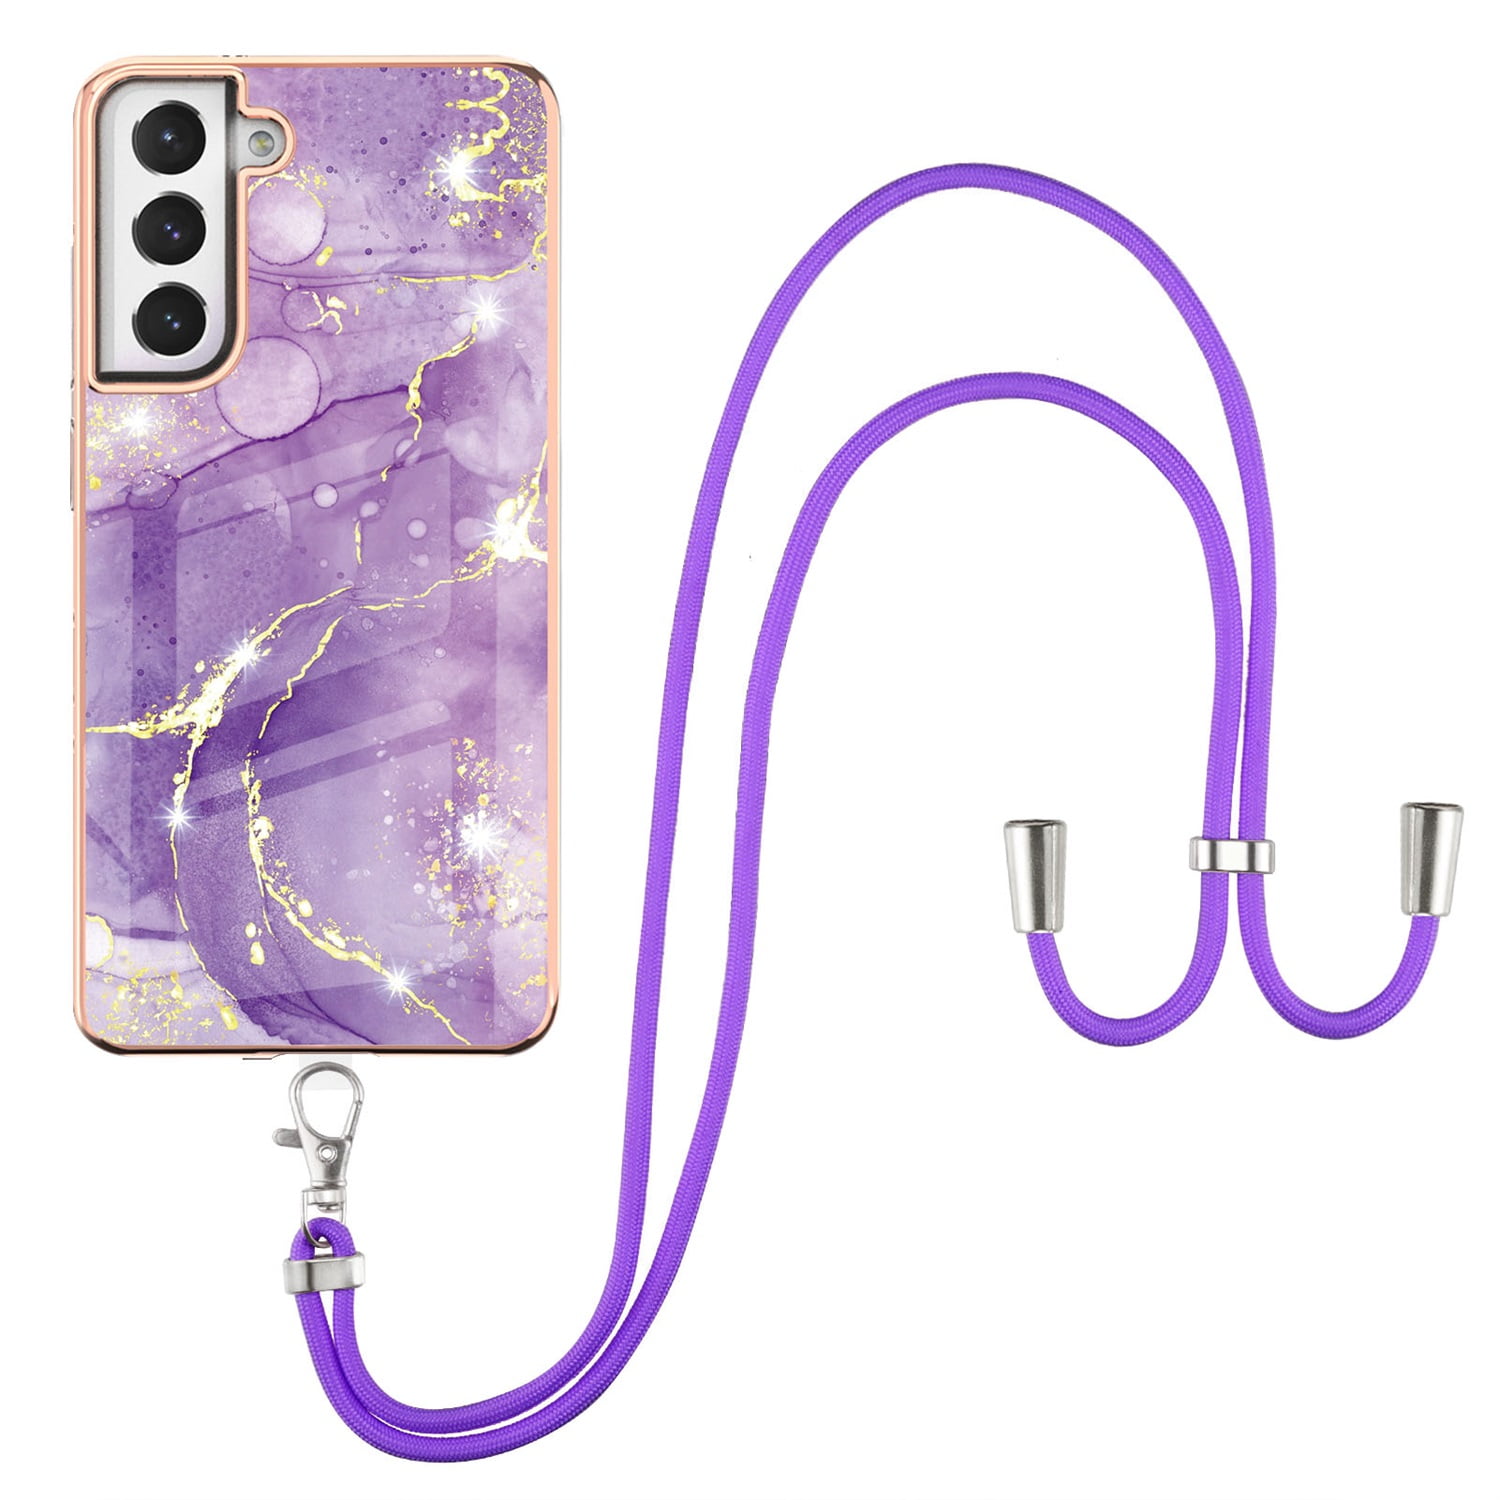 Urarssa for Samsung S21 FE Case Cute Bling Plating Heart Design Cases Women  Girls Shockproof Bumper Silicone Slim Protective Cover for Samsung Galaxy